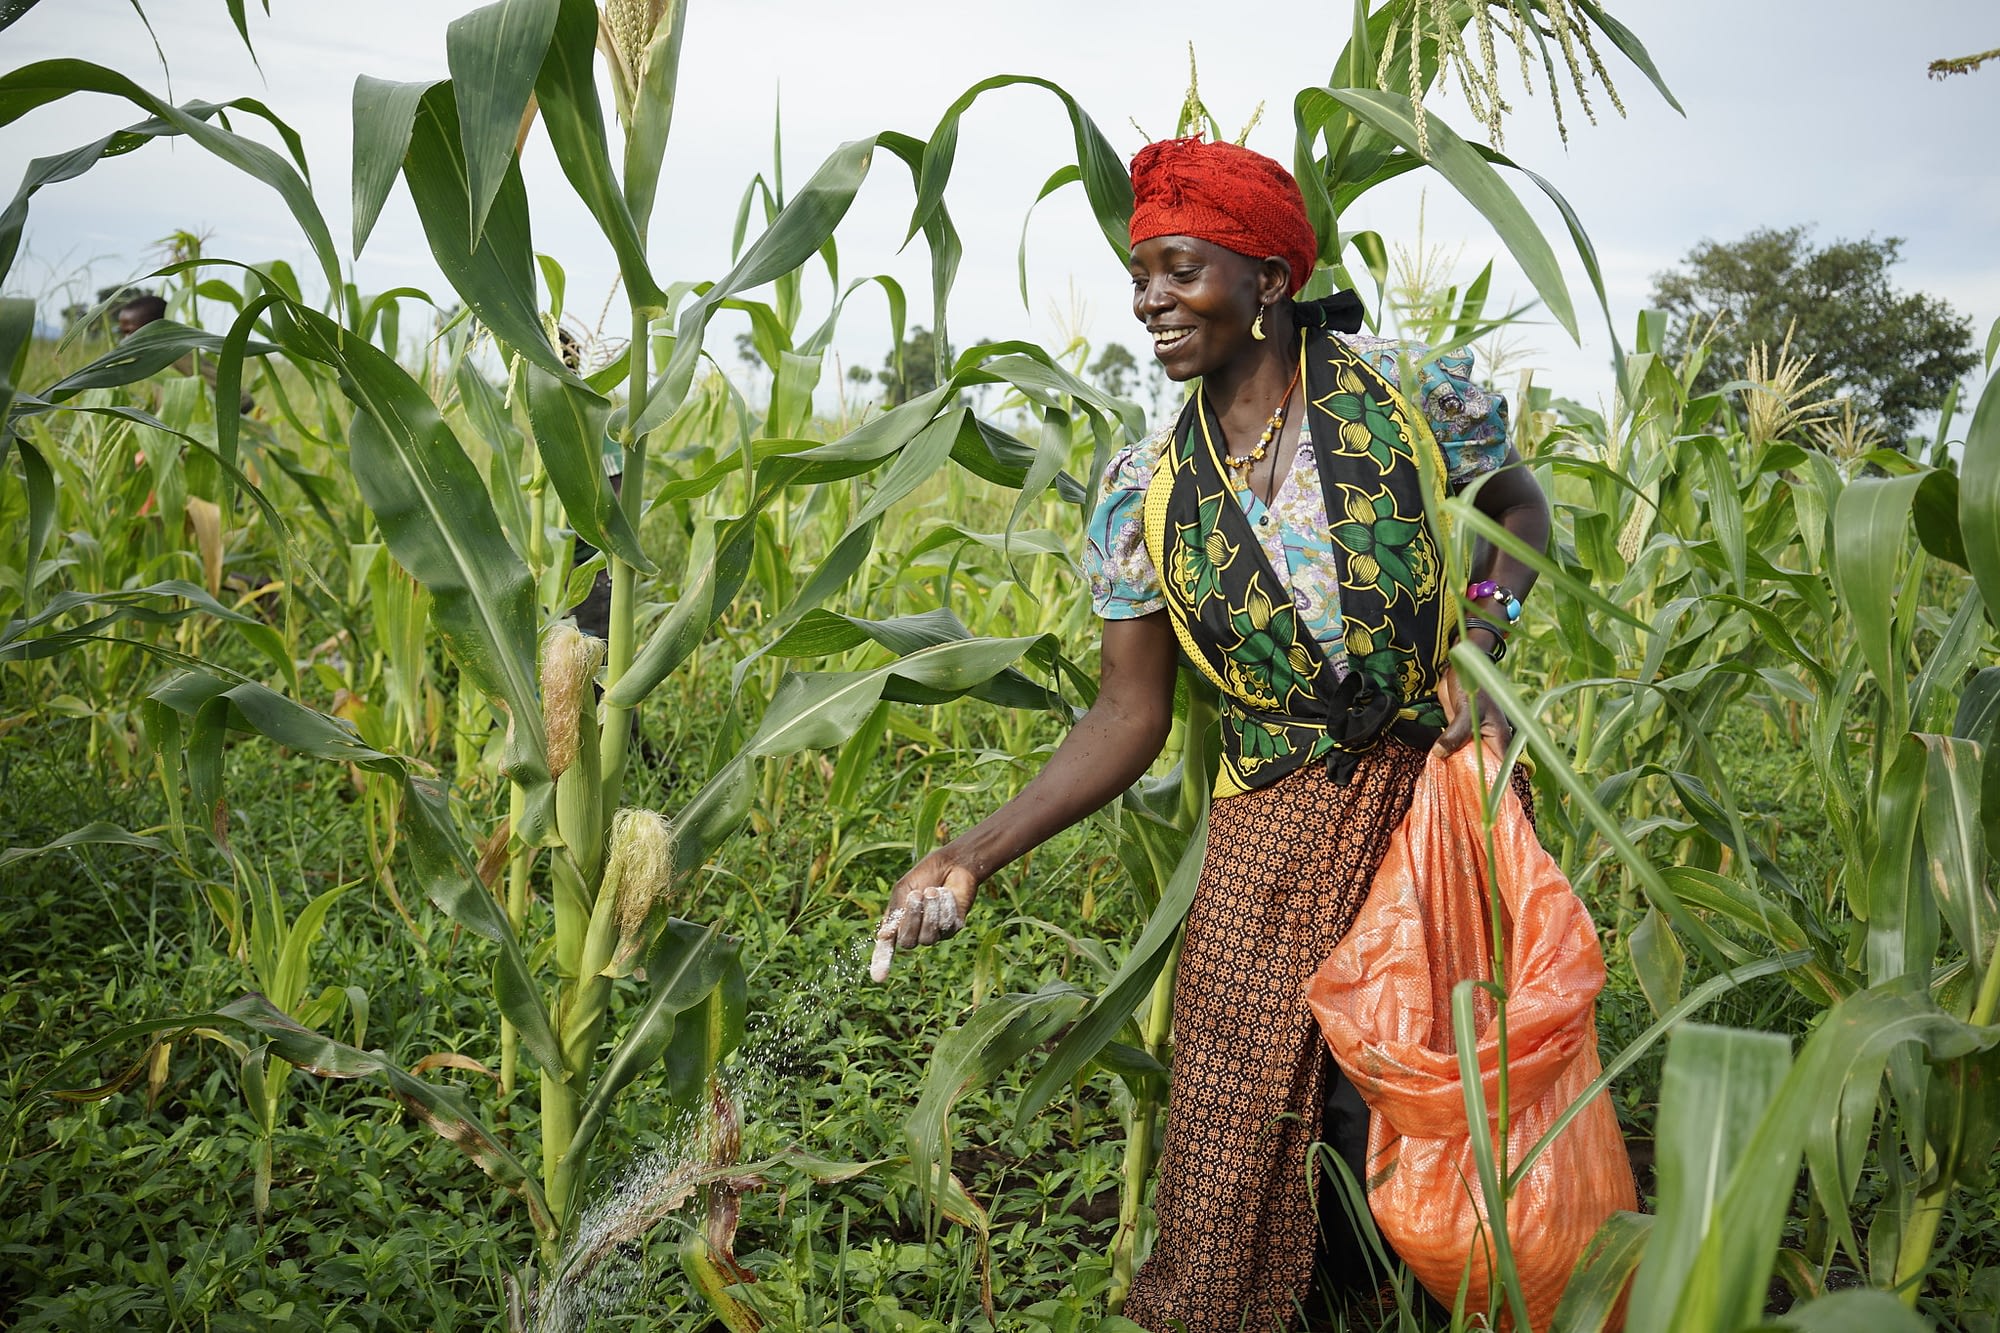 A farm worker applies fertilizer in a field of Staha maize for seed production at Suba Agro's Mbezi farm in Tanzania. (Photo: Peter Lowe/CIMMYT)